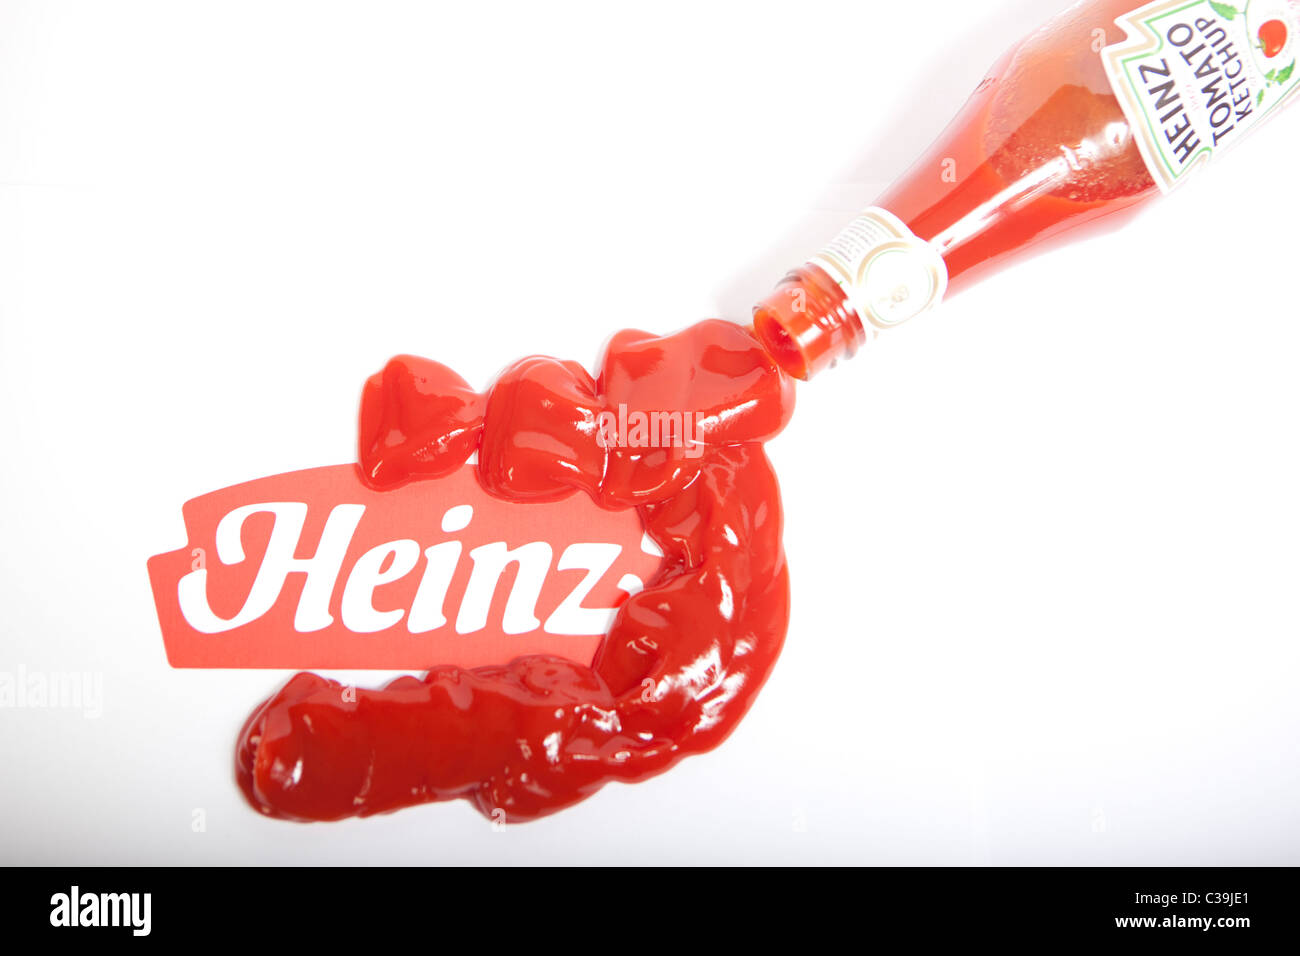 Illustrative image of the Heinz logo and their Tomato Ketchup. Stock Photo